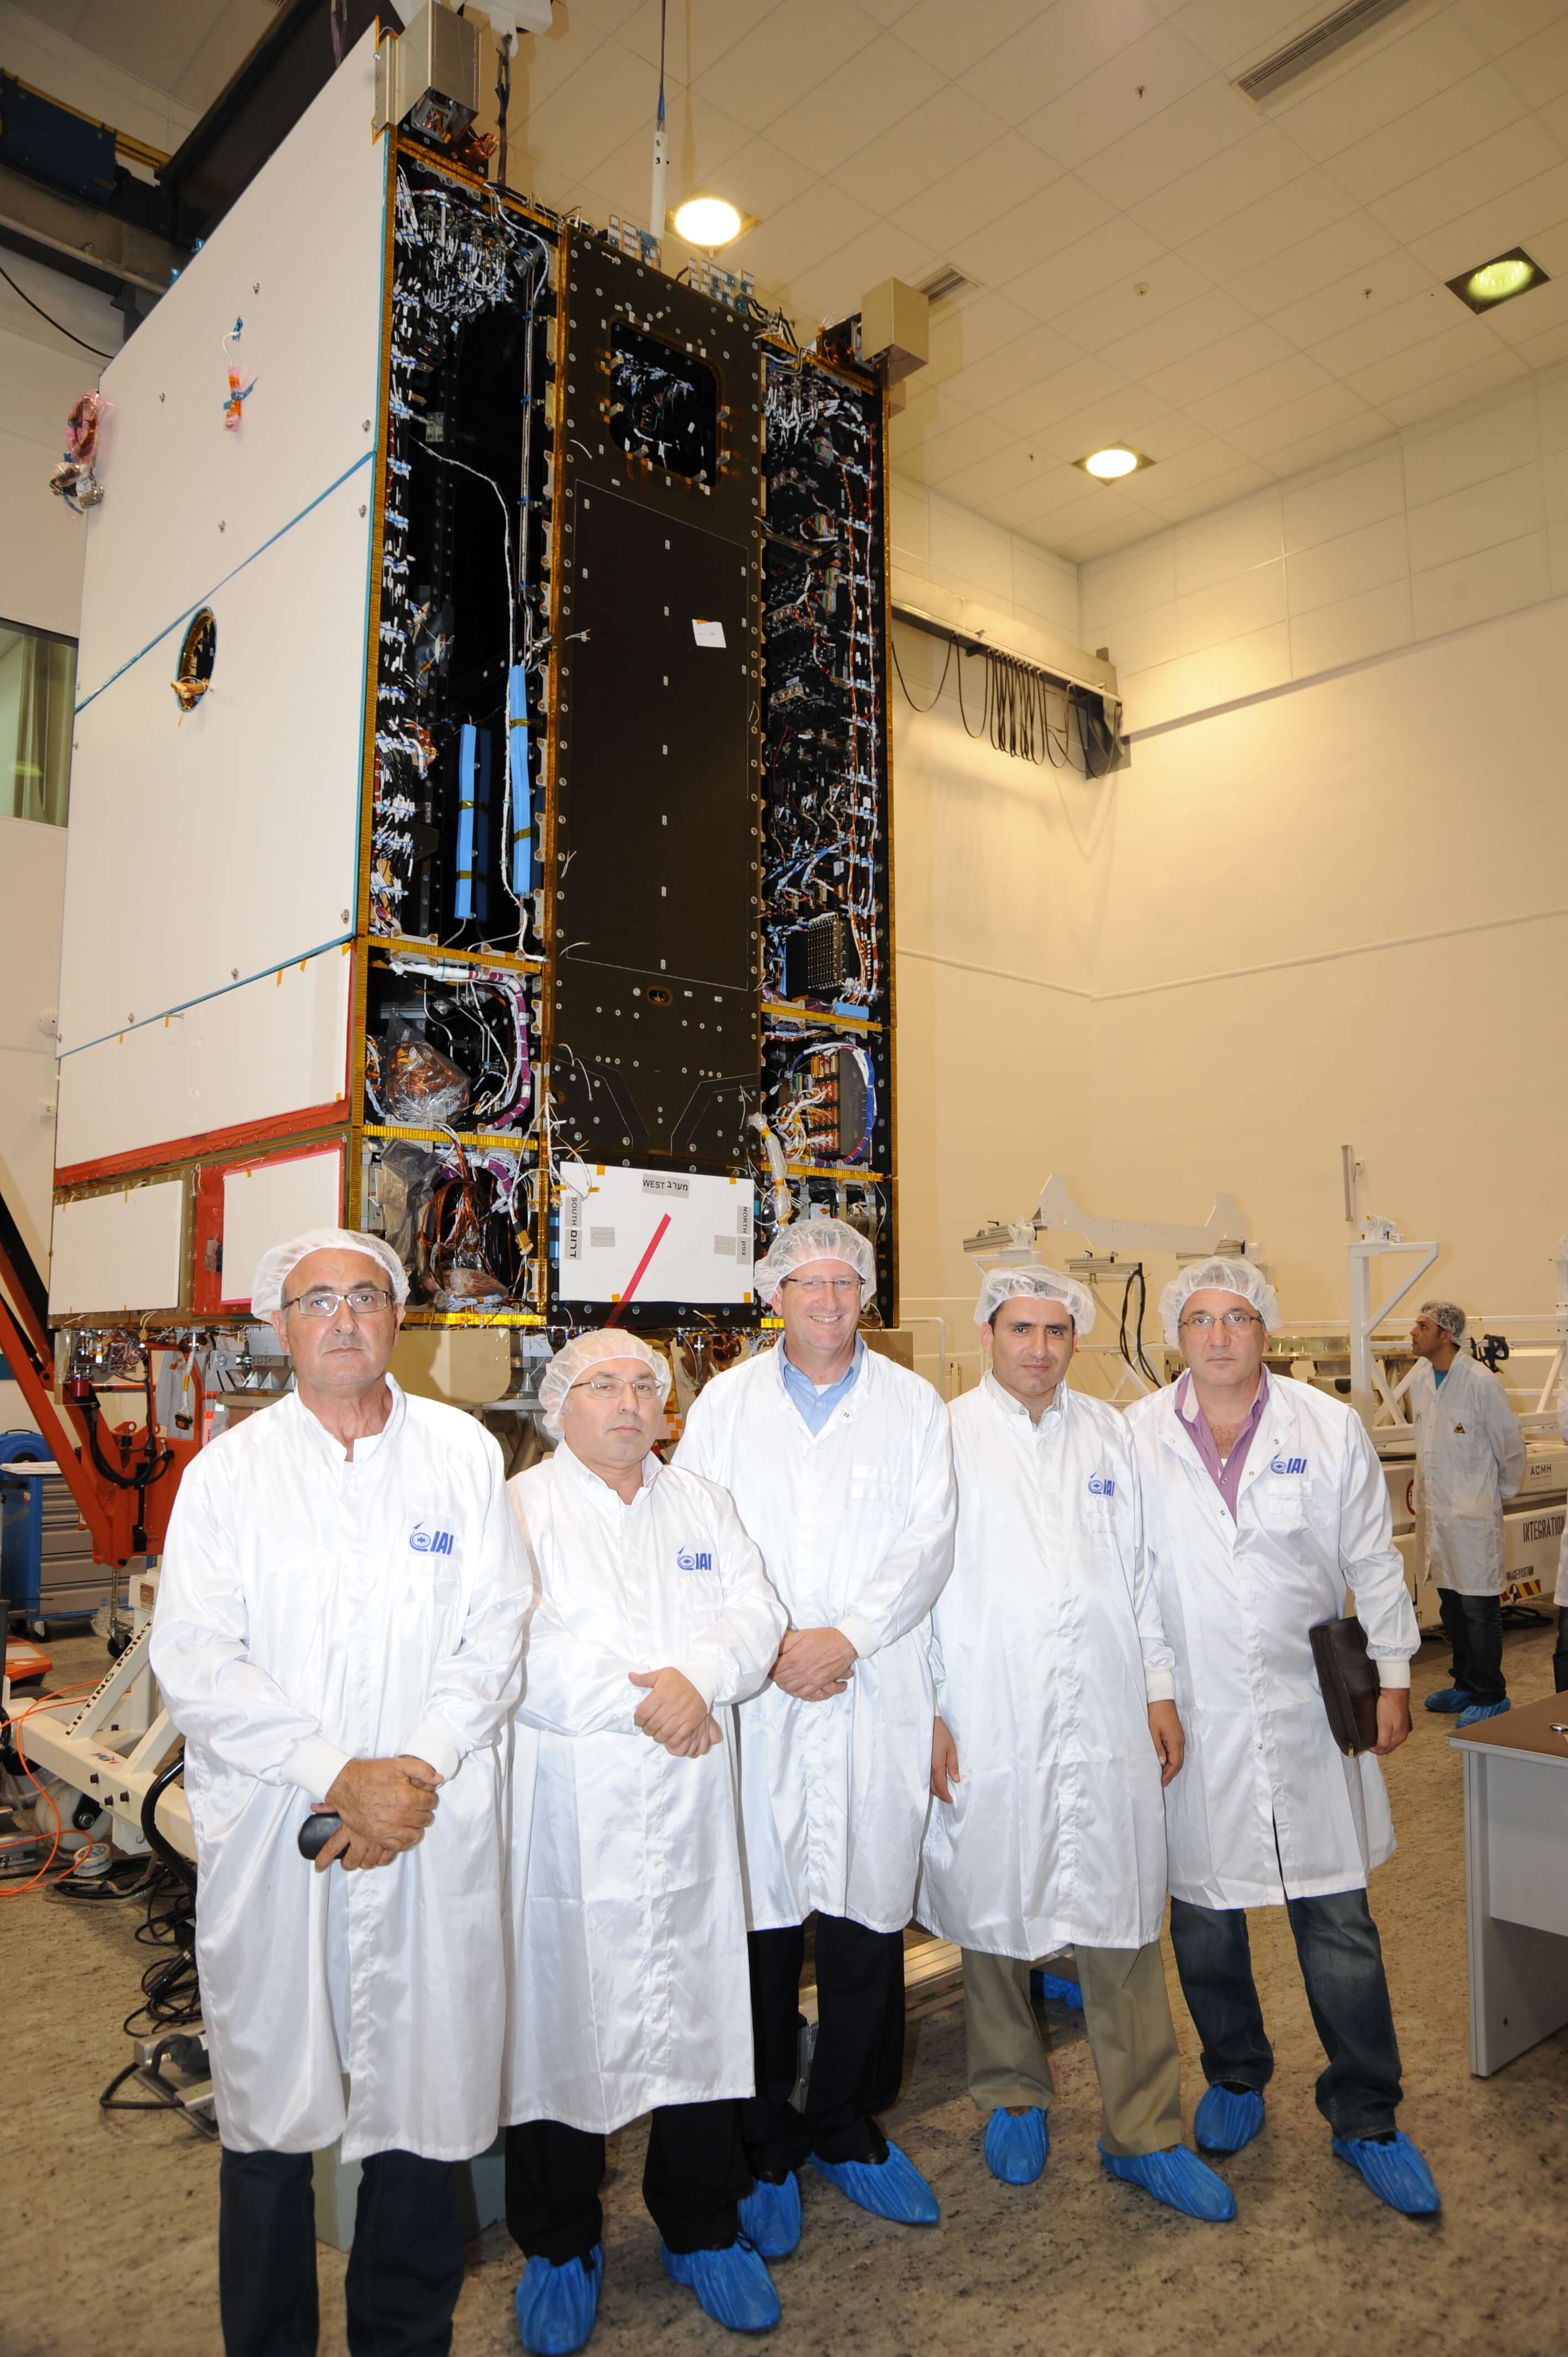 , from right to left: MK Robert Tibiev, MK Ze'ev Elkin - chairman of the committee, Ofer Doron, director of the space plant, MK Avraham Michaeli and MK Daniel Ben Simon, against the backdrop of the Amos 4 satellite of the Aerospace Industry.